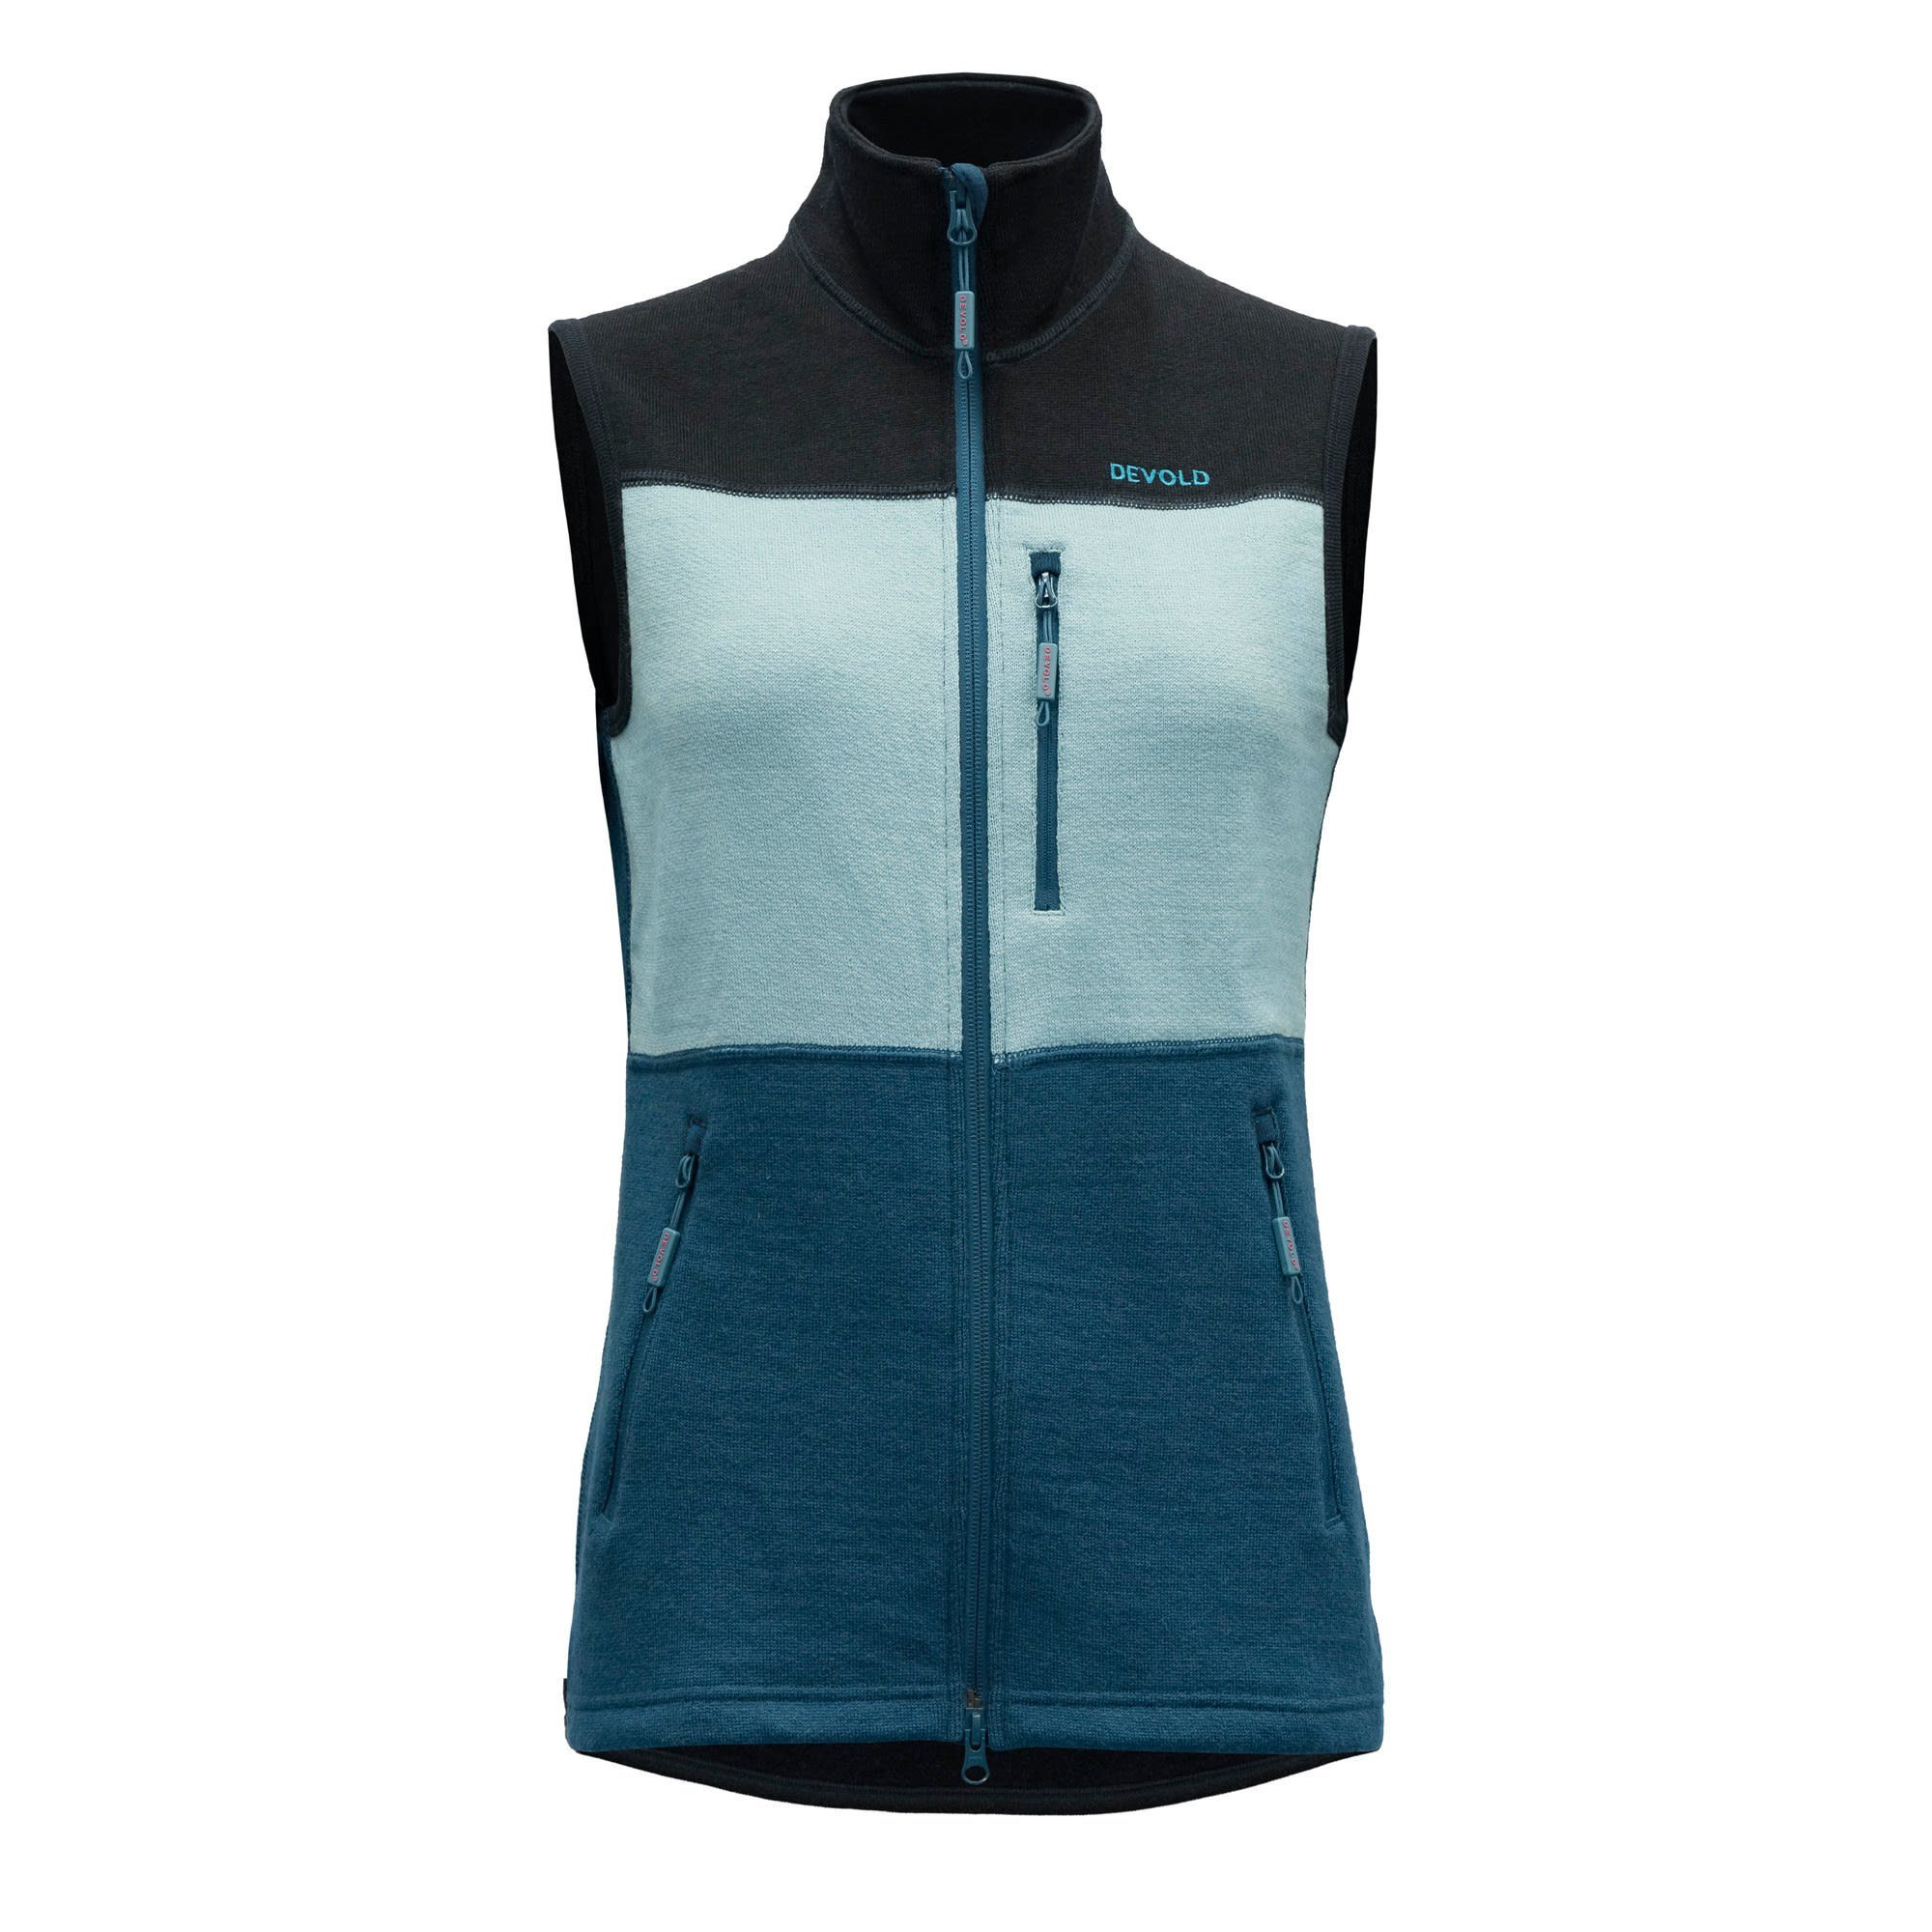 Damen W Funktionsweste Devold Devold - Cameo Ink Isolationsweste Vest Wool Thermo - Flood